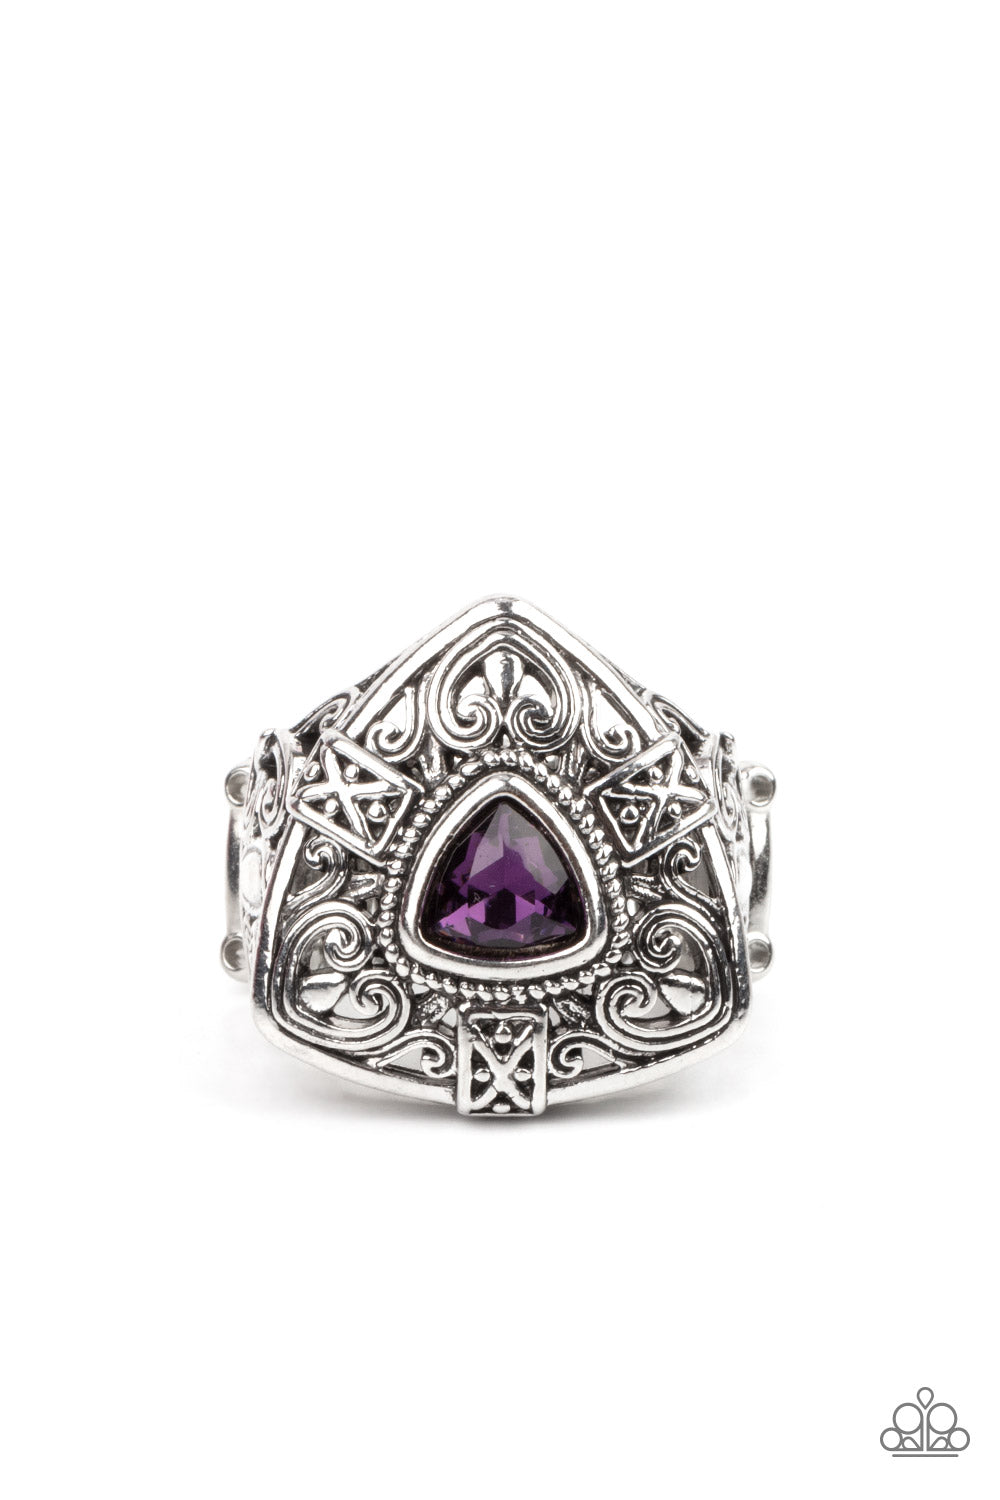 Charismatic Couture - Purple Ring